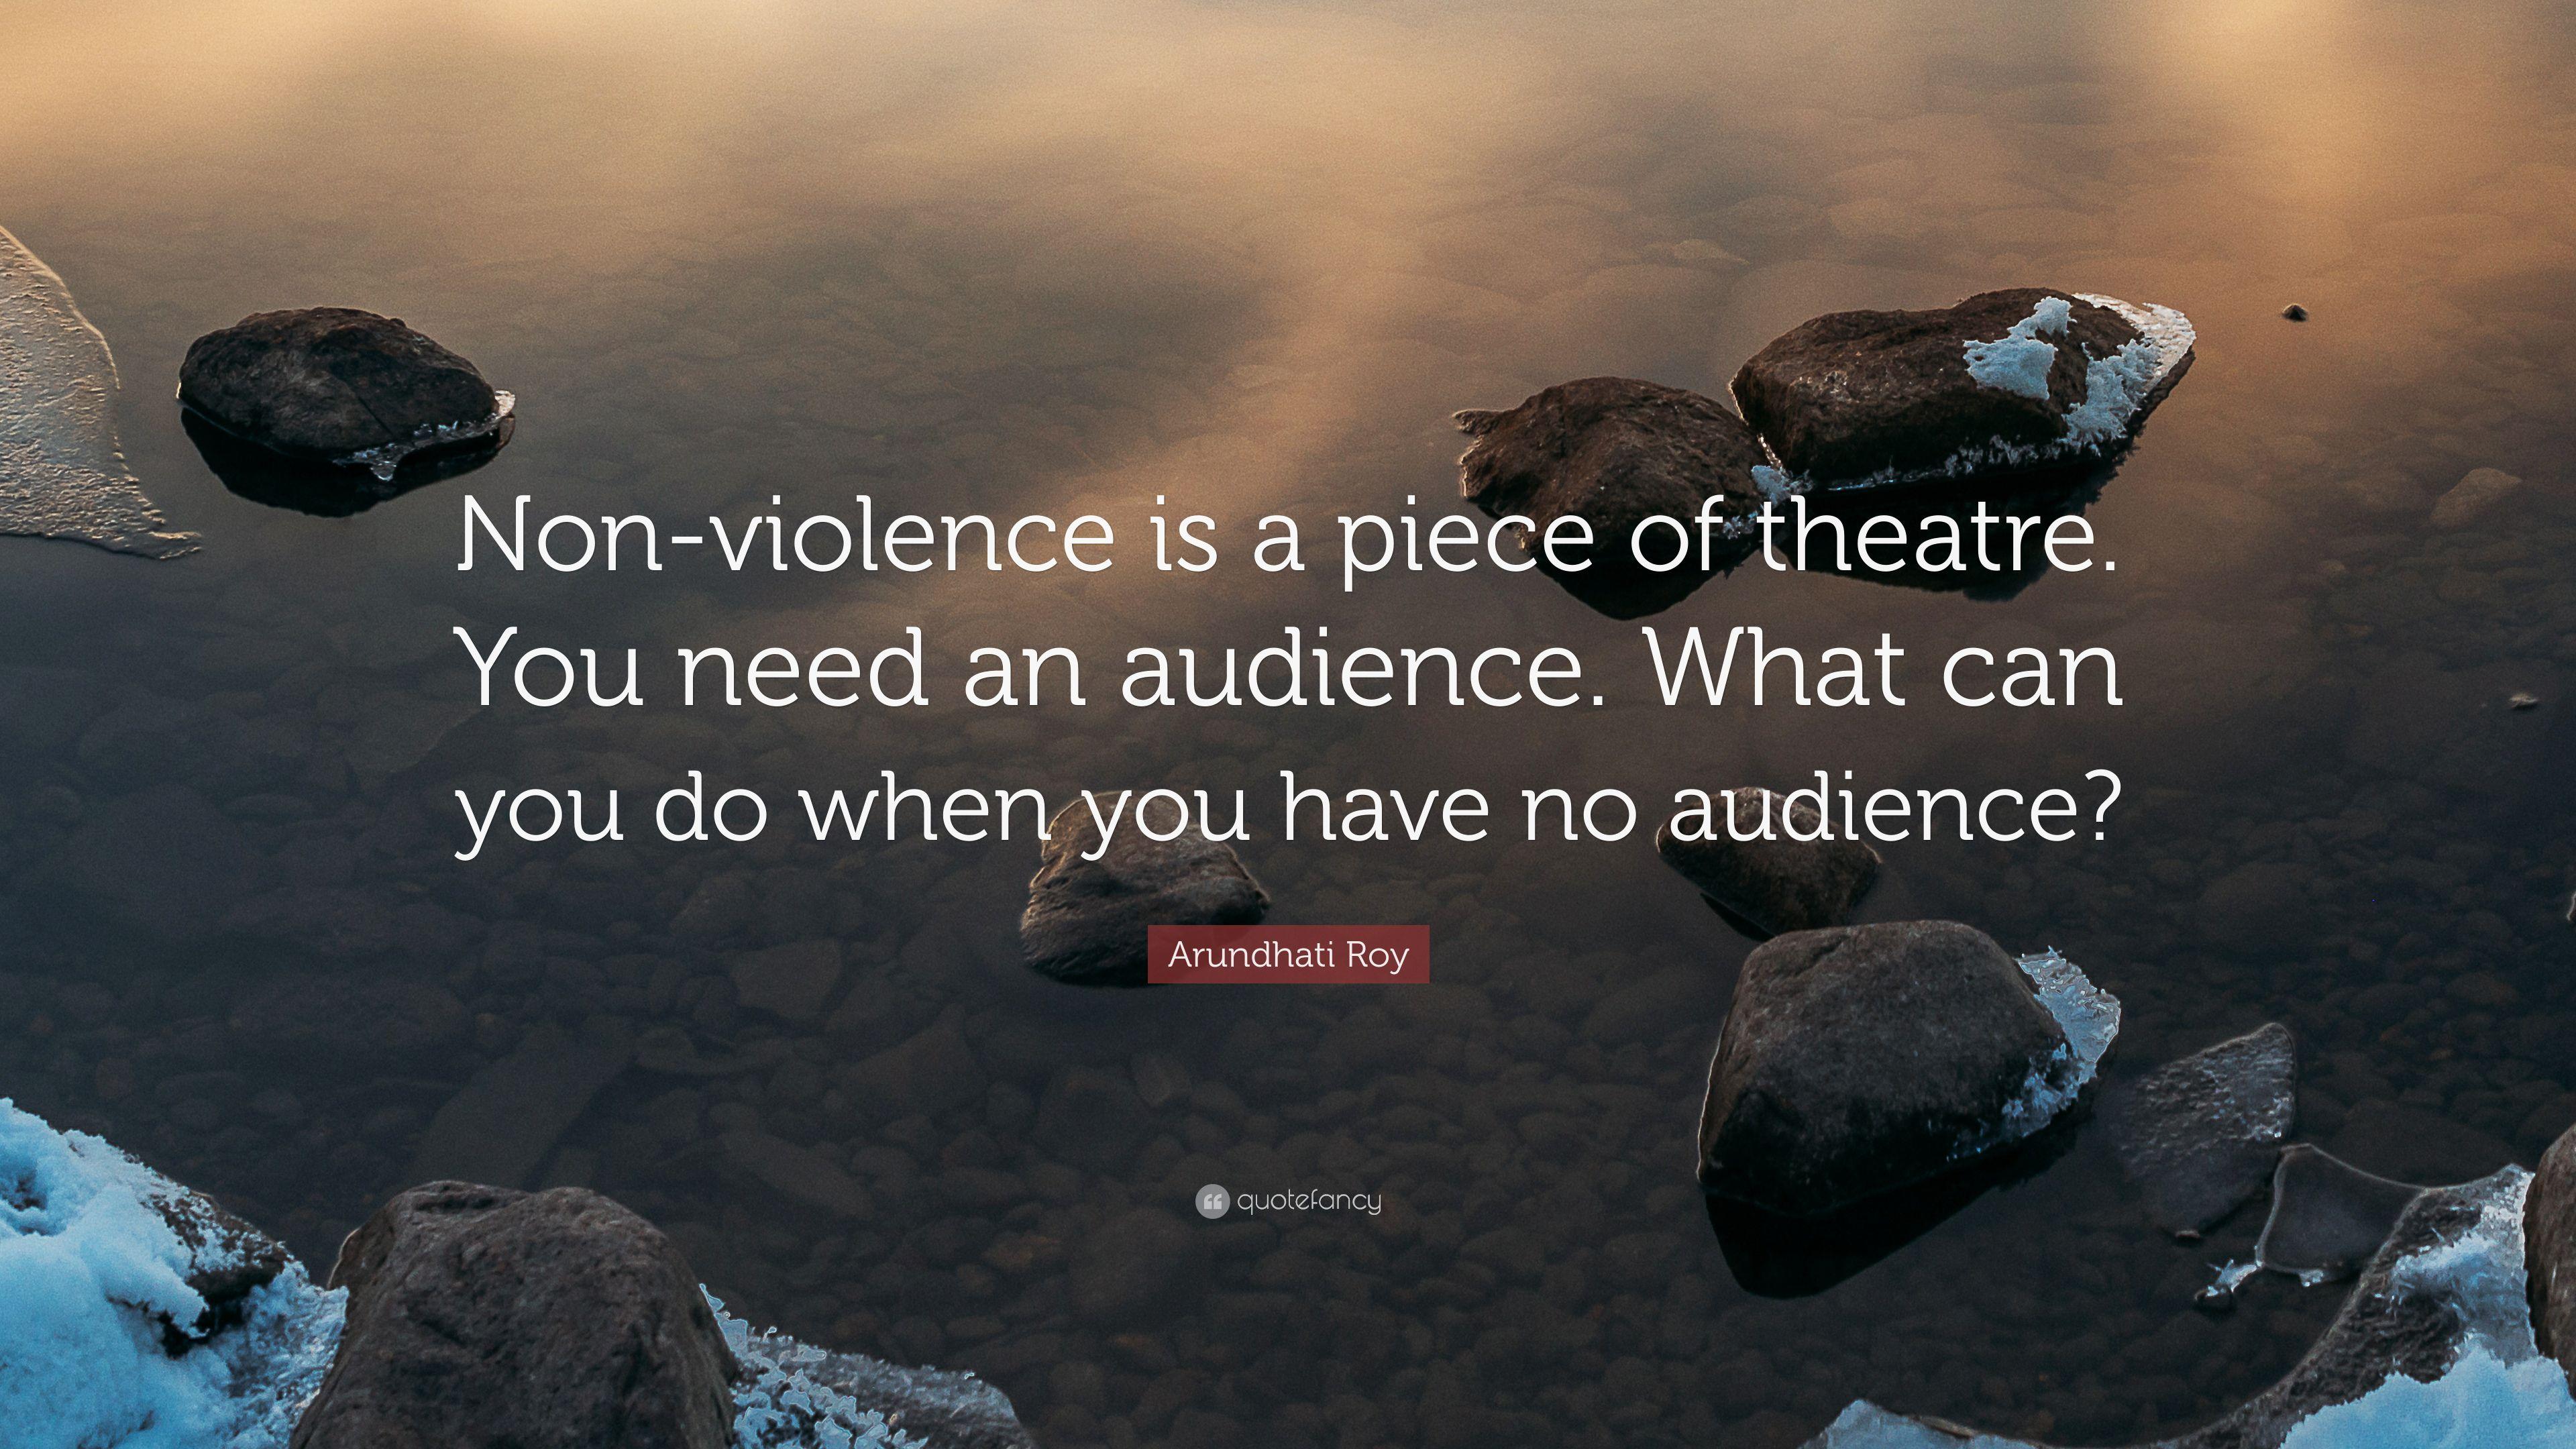 Arundhati Roy Quote: “Non Violence Is A Piece Of Theatre. You Need